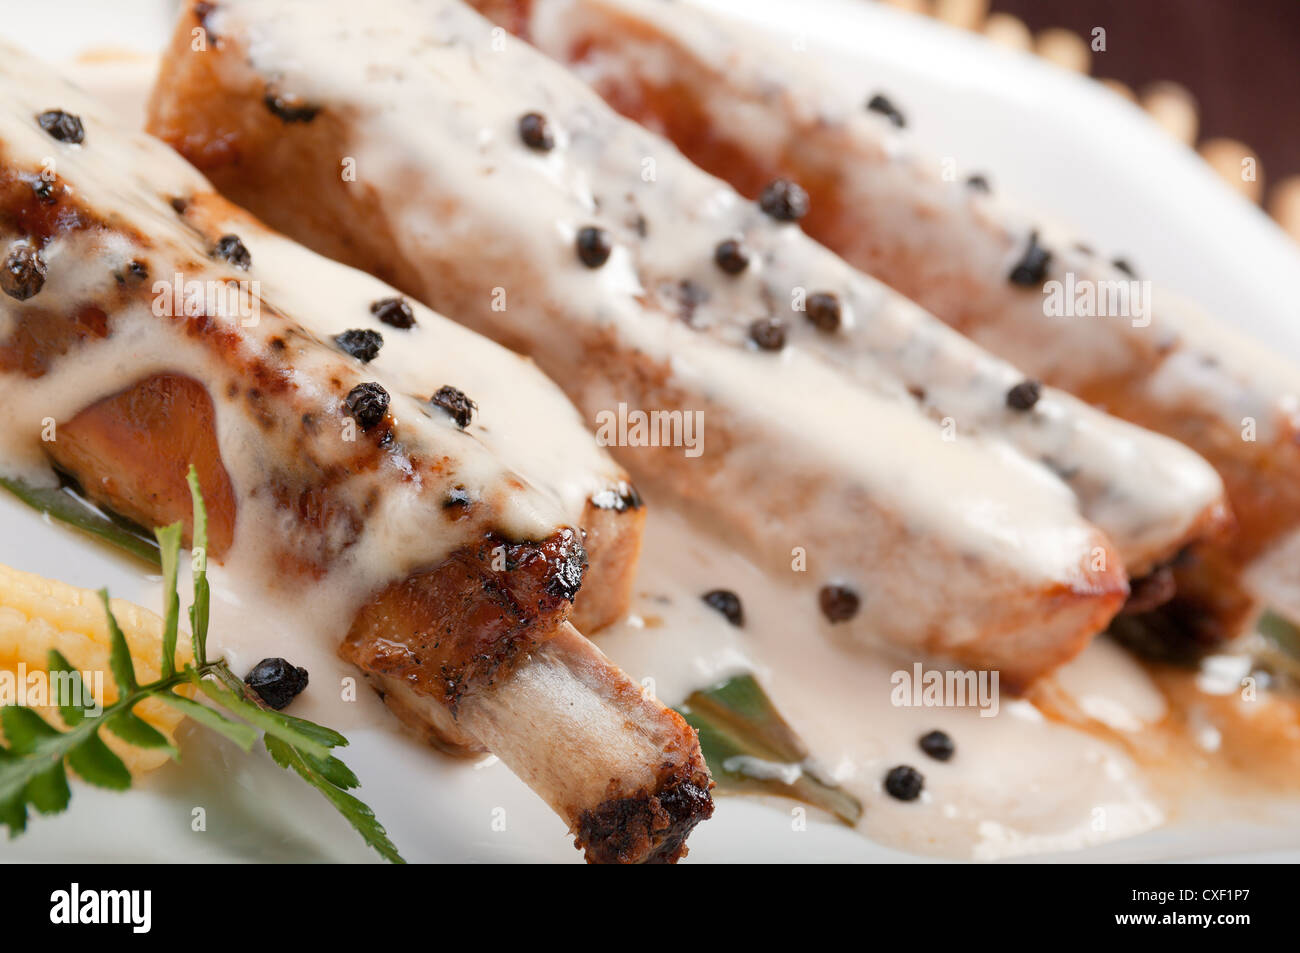 roasted pork ribs in a plate Stock Photo